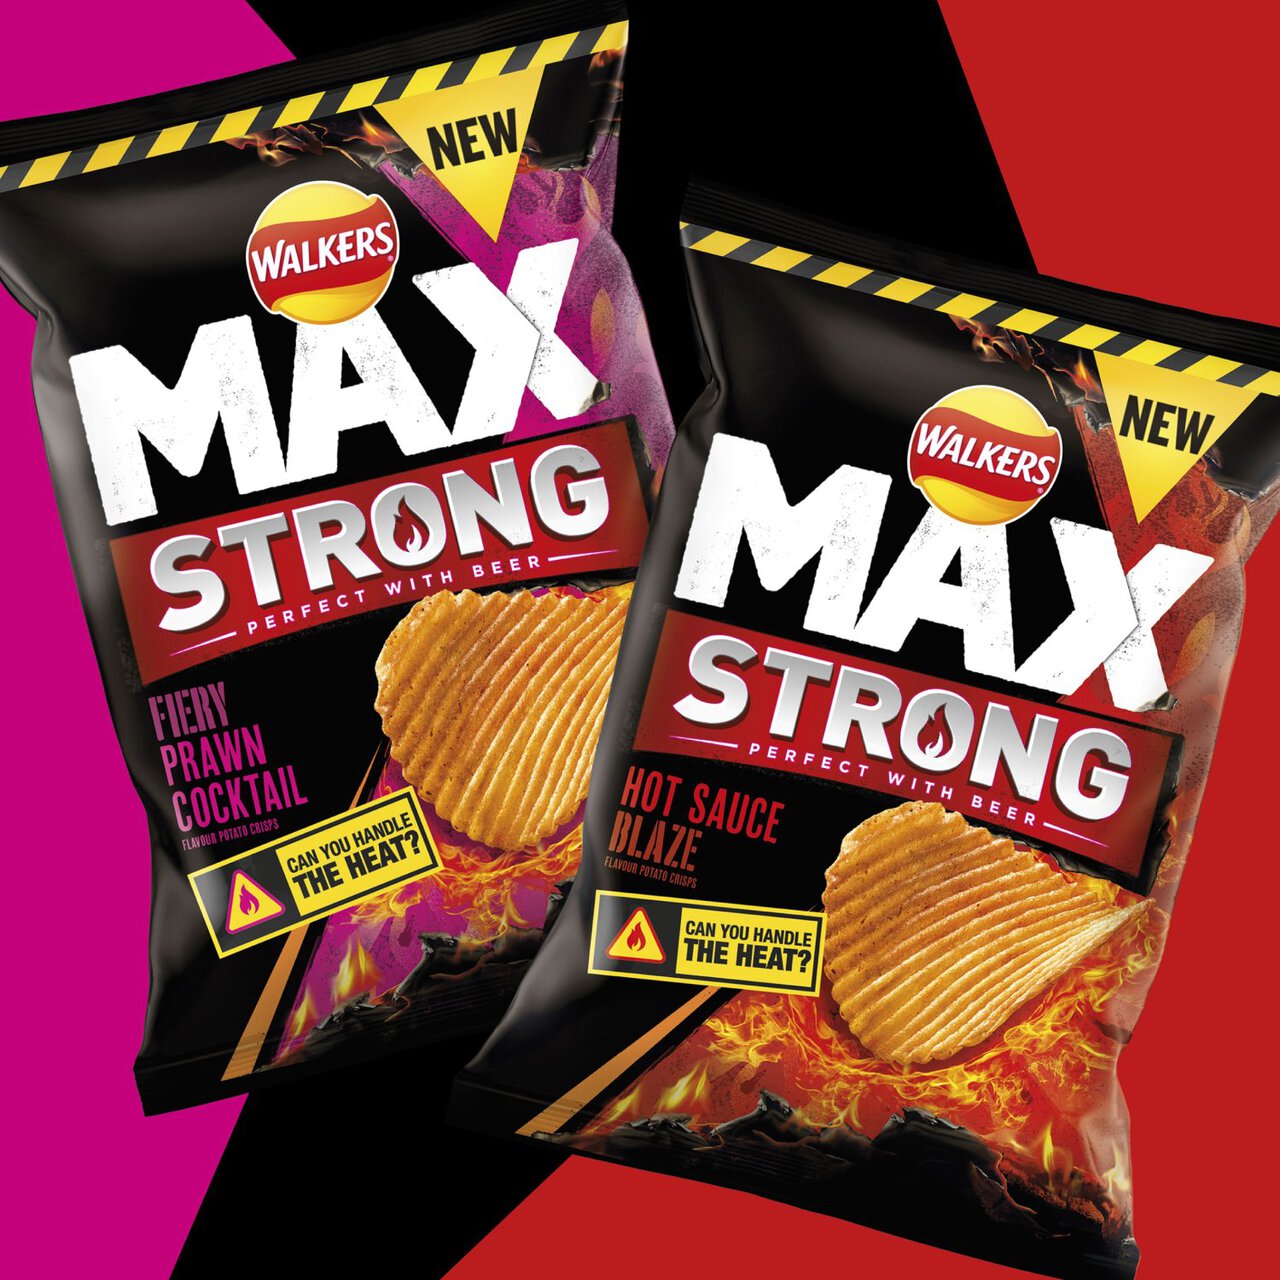 Walkers Max Strong Fiery Prawn Cocktail Sharing Crisps 140g